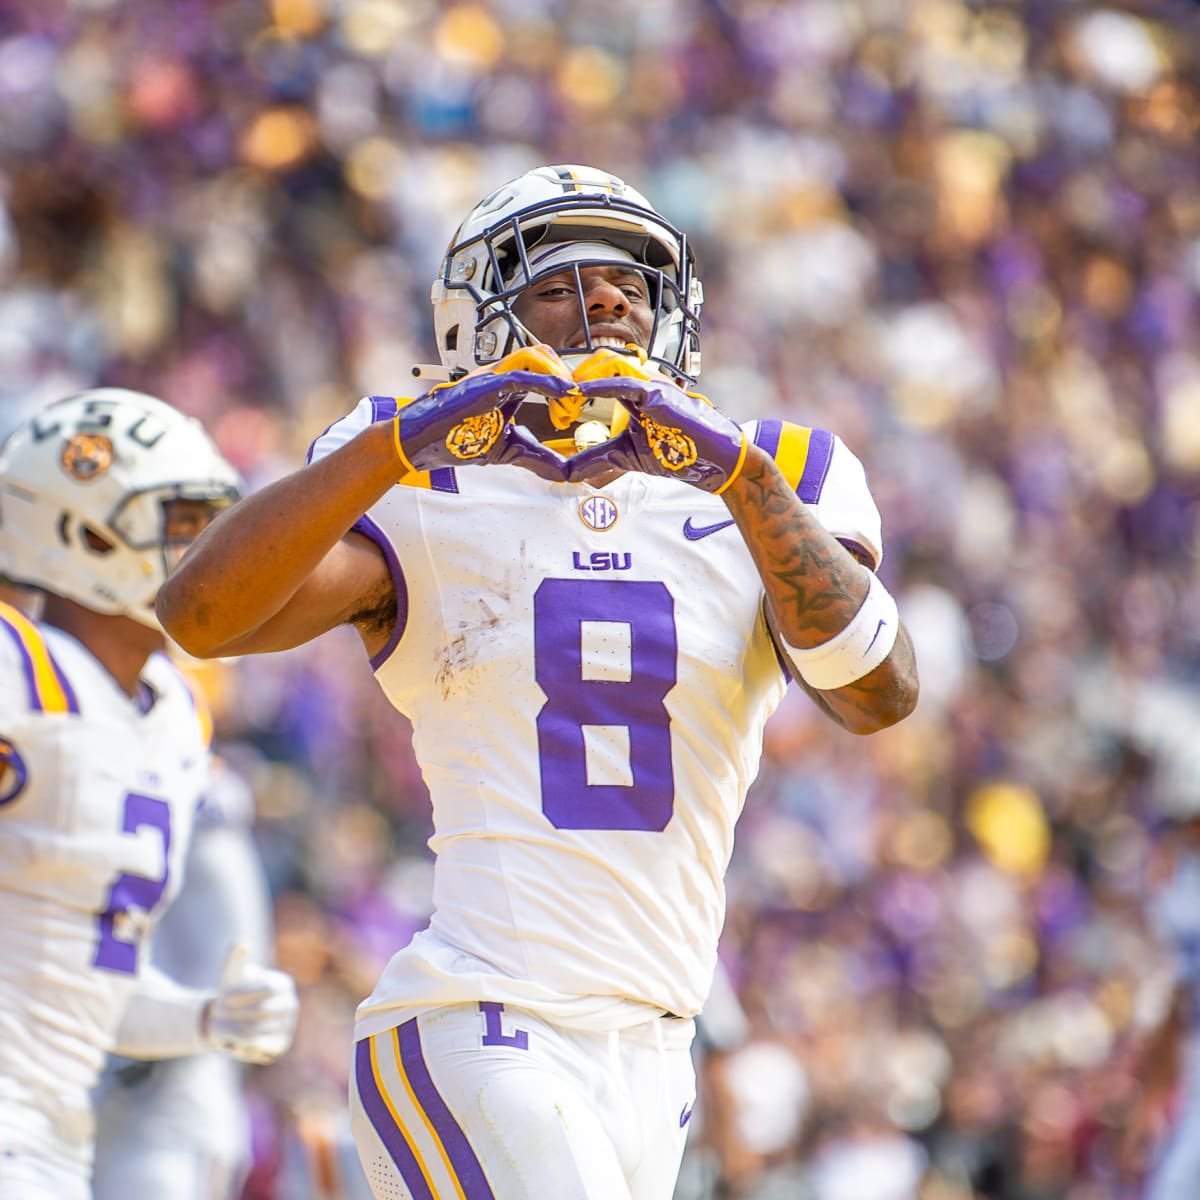 Blessed to receive an Offer from my dream school, Louisiana state university 💜💛 #GoTigers #AGTG🙏🏽 @SteepDiesel @TheCribSouthFLA @ChadSimmons_ @D2Dperformance